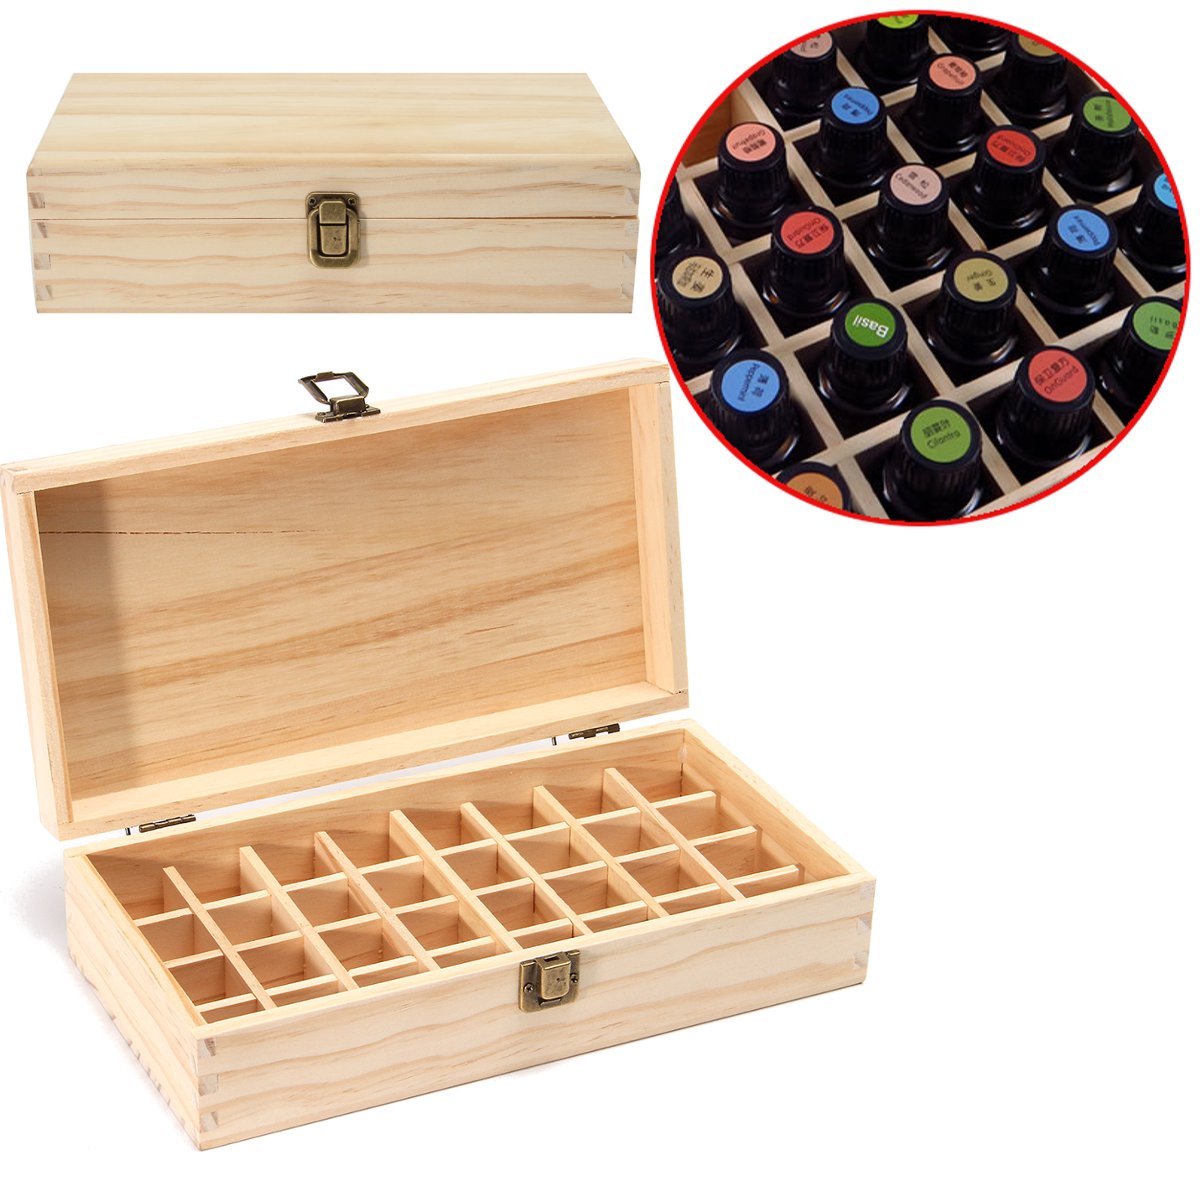 

32 Holes Essential Oils Wooden Box Container Solid Pine Pure Natural Wood Storage Case